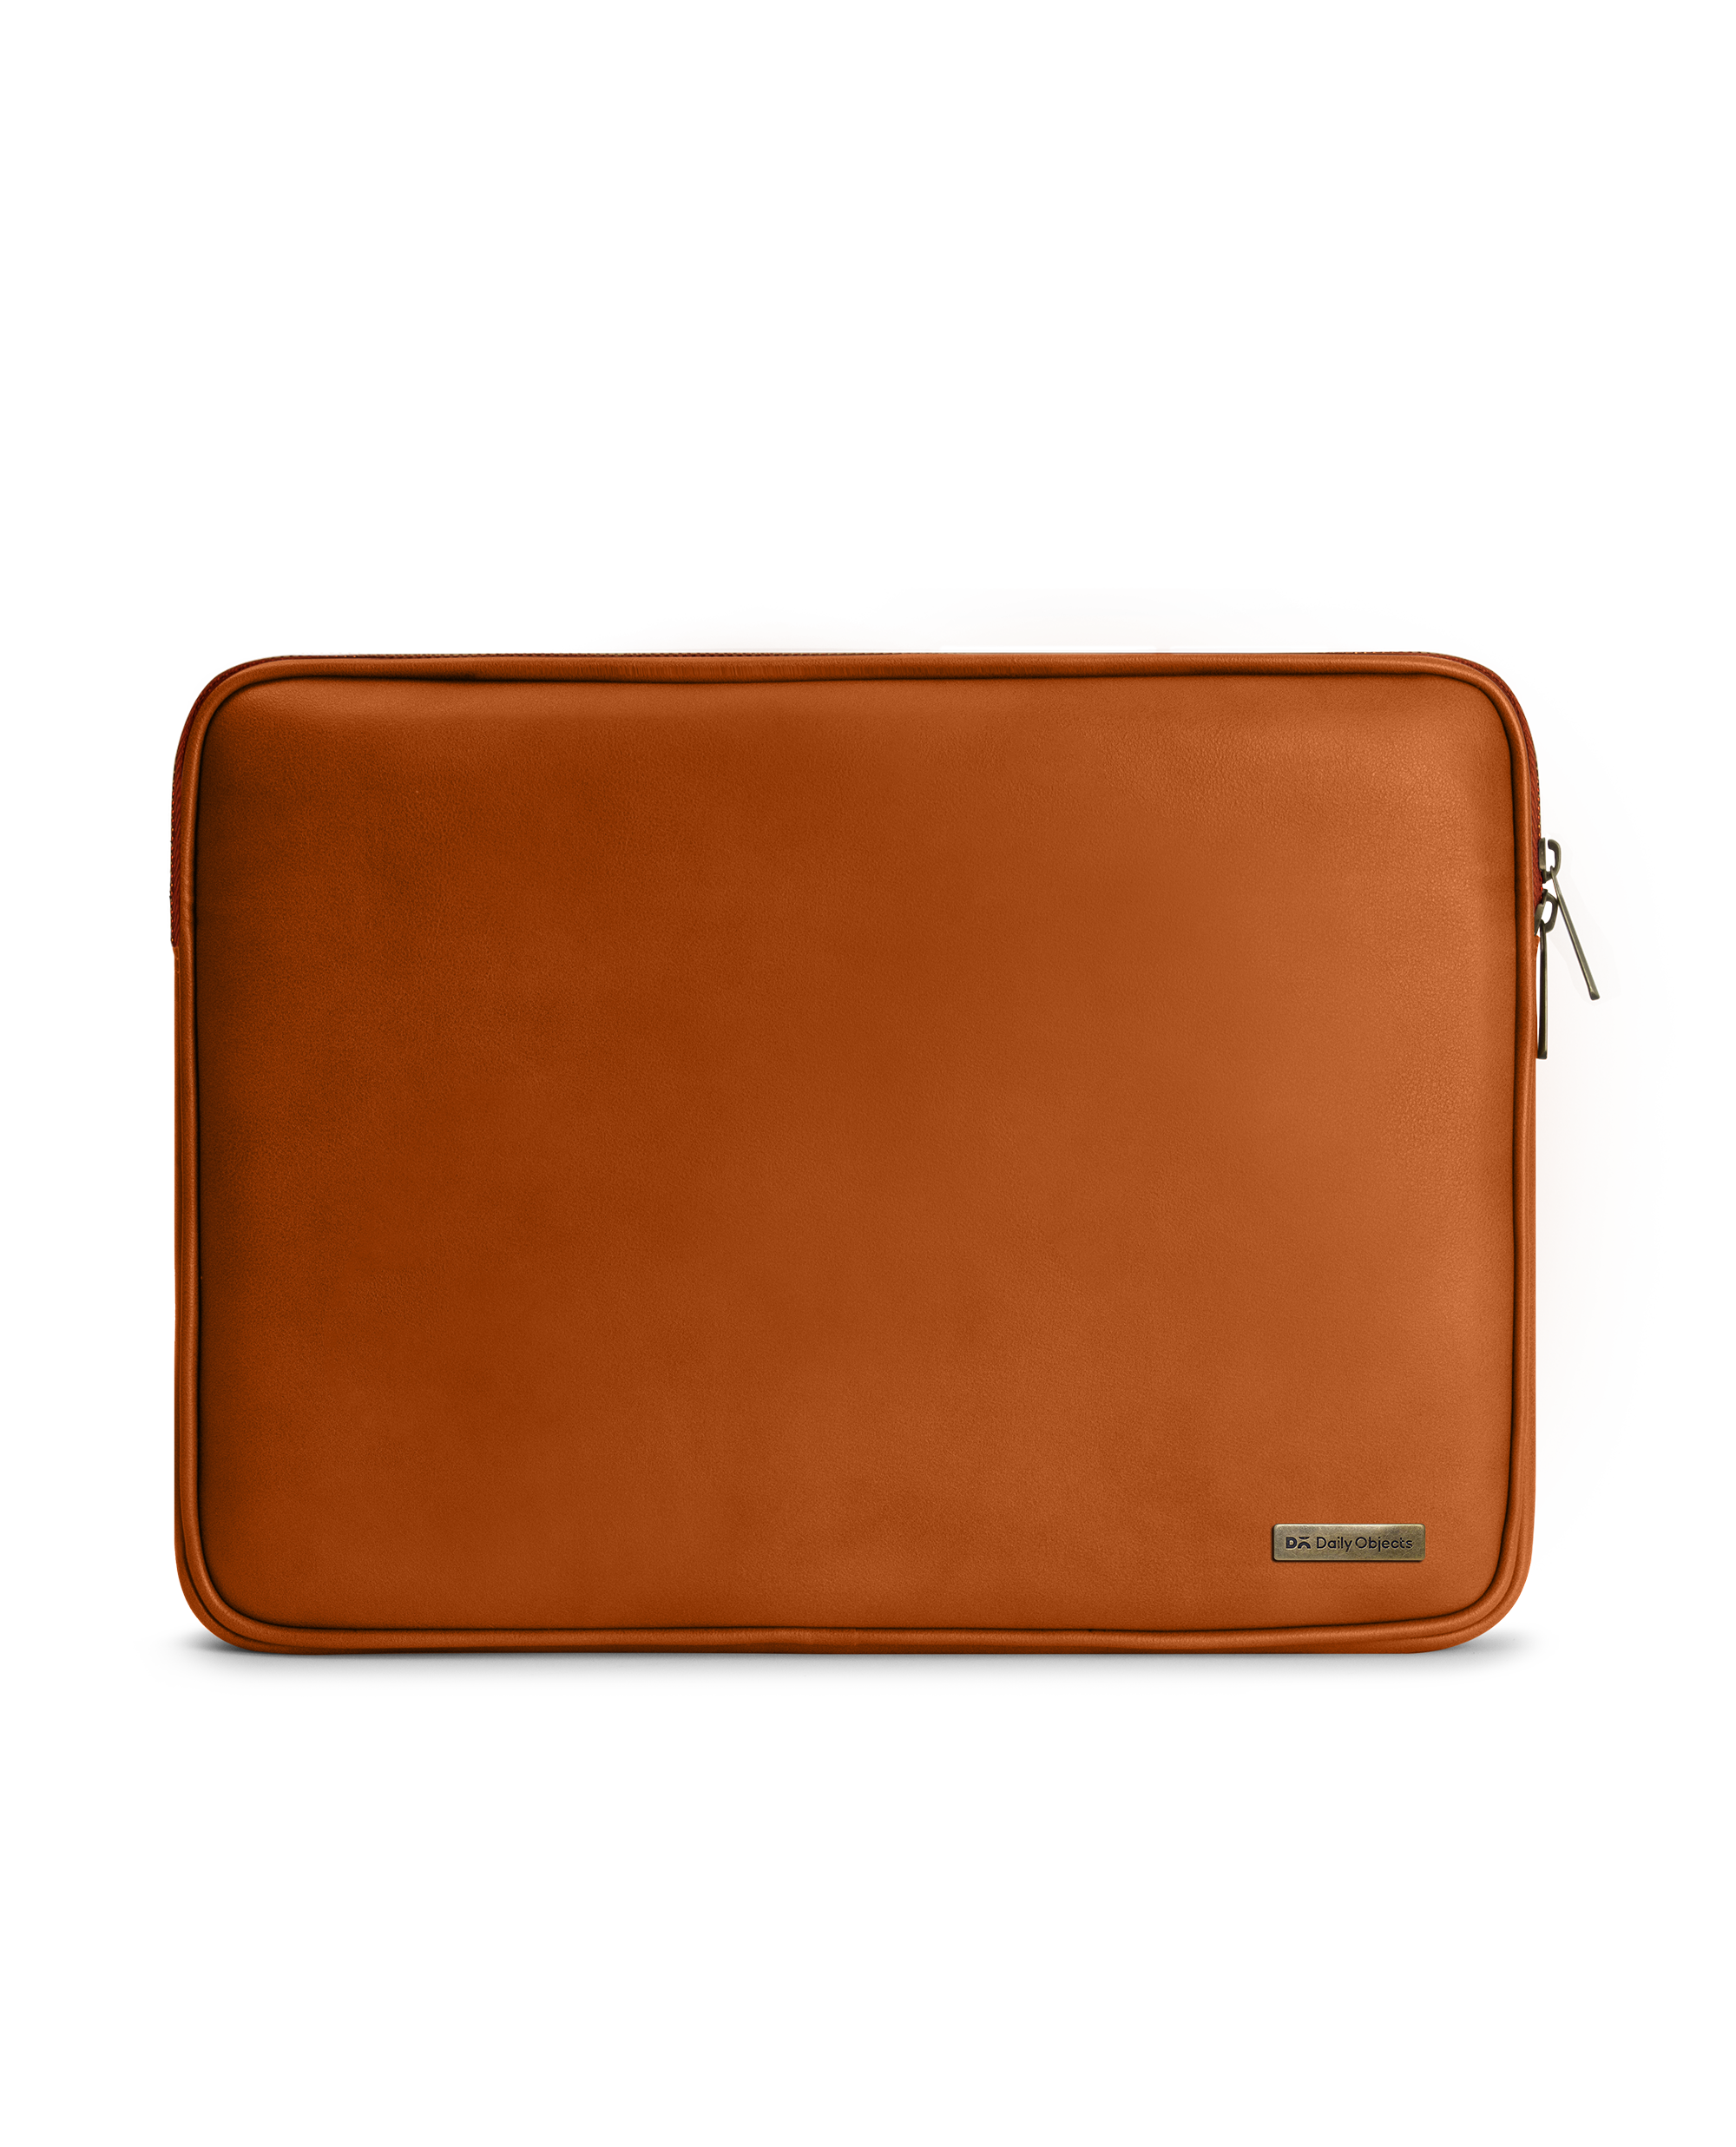 DailyObjects Tan Vegan Leather Zippered Sleeve For Laptop